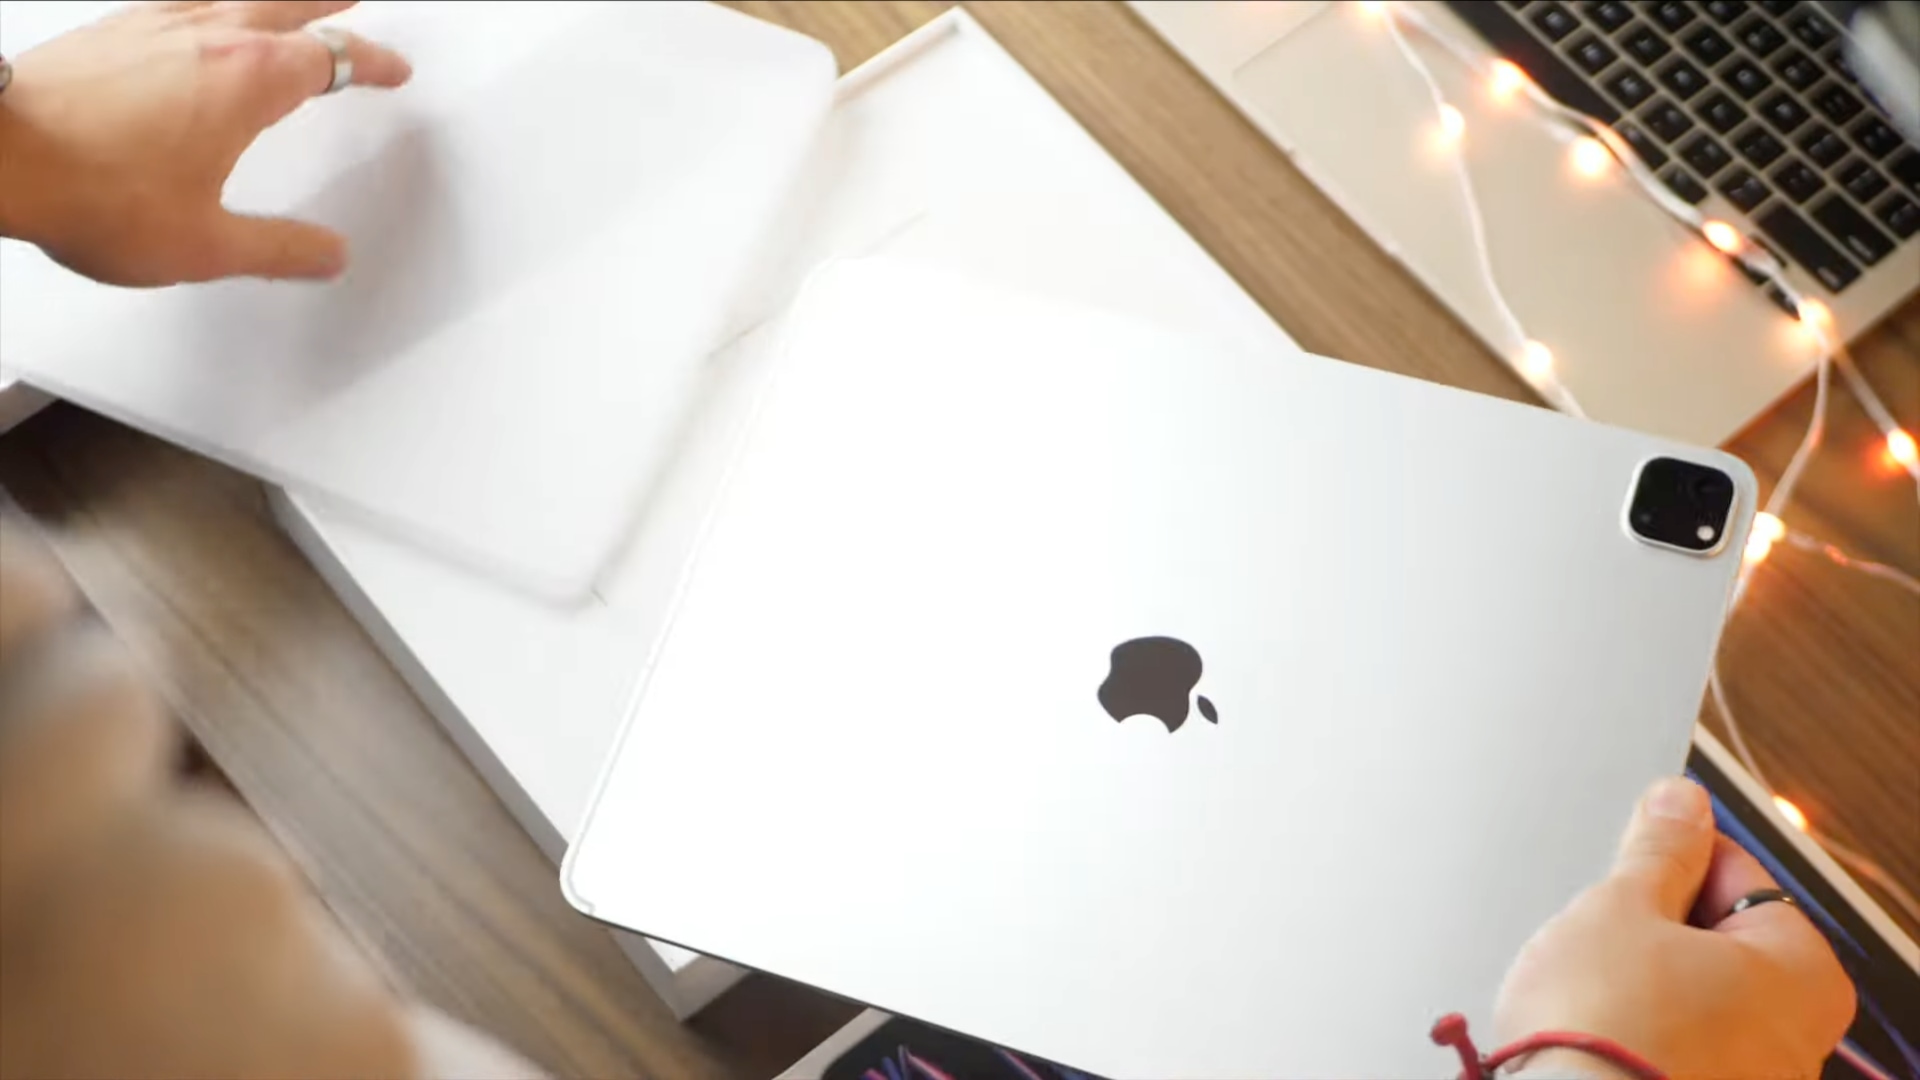 A young male's hands above a wooden desk taking the plastic wrapping off a brand new 12.9-inch iPad Pro 